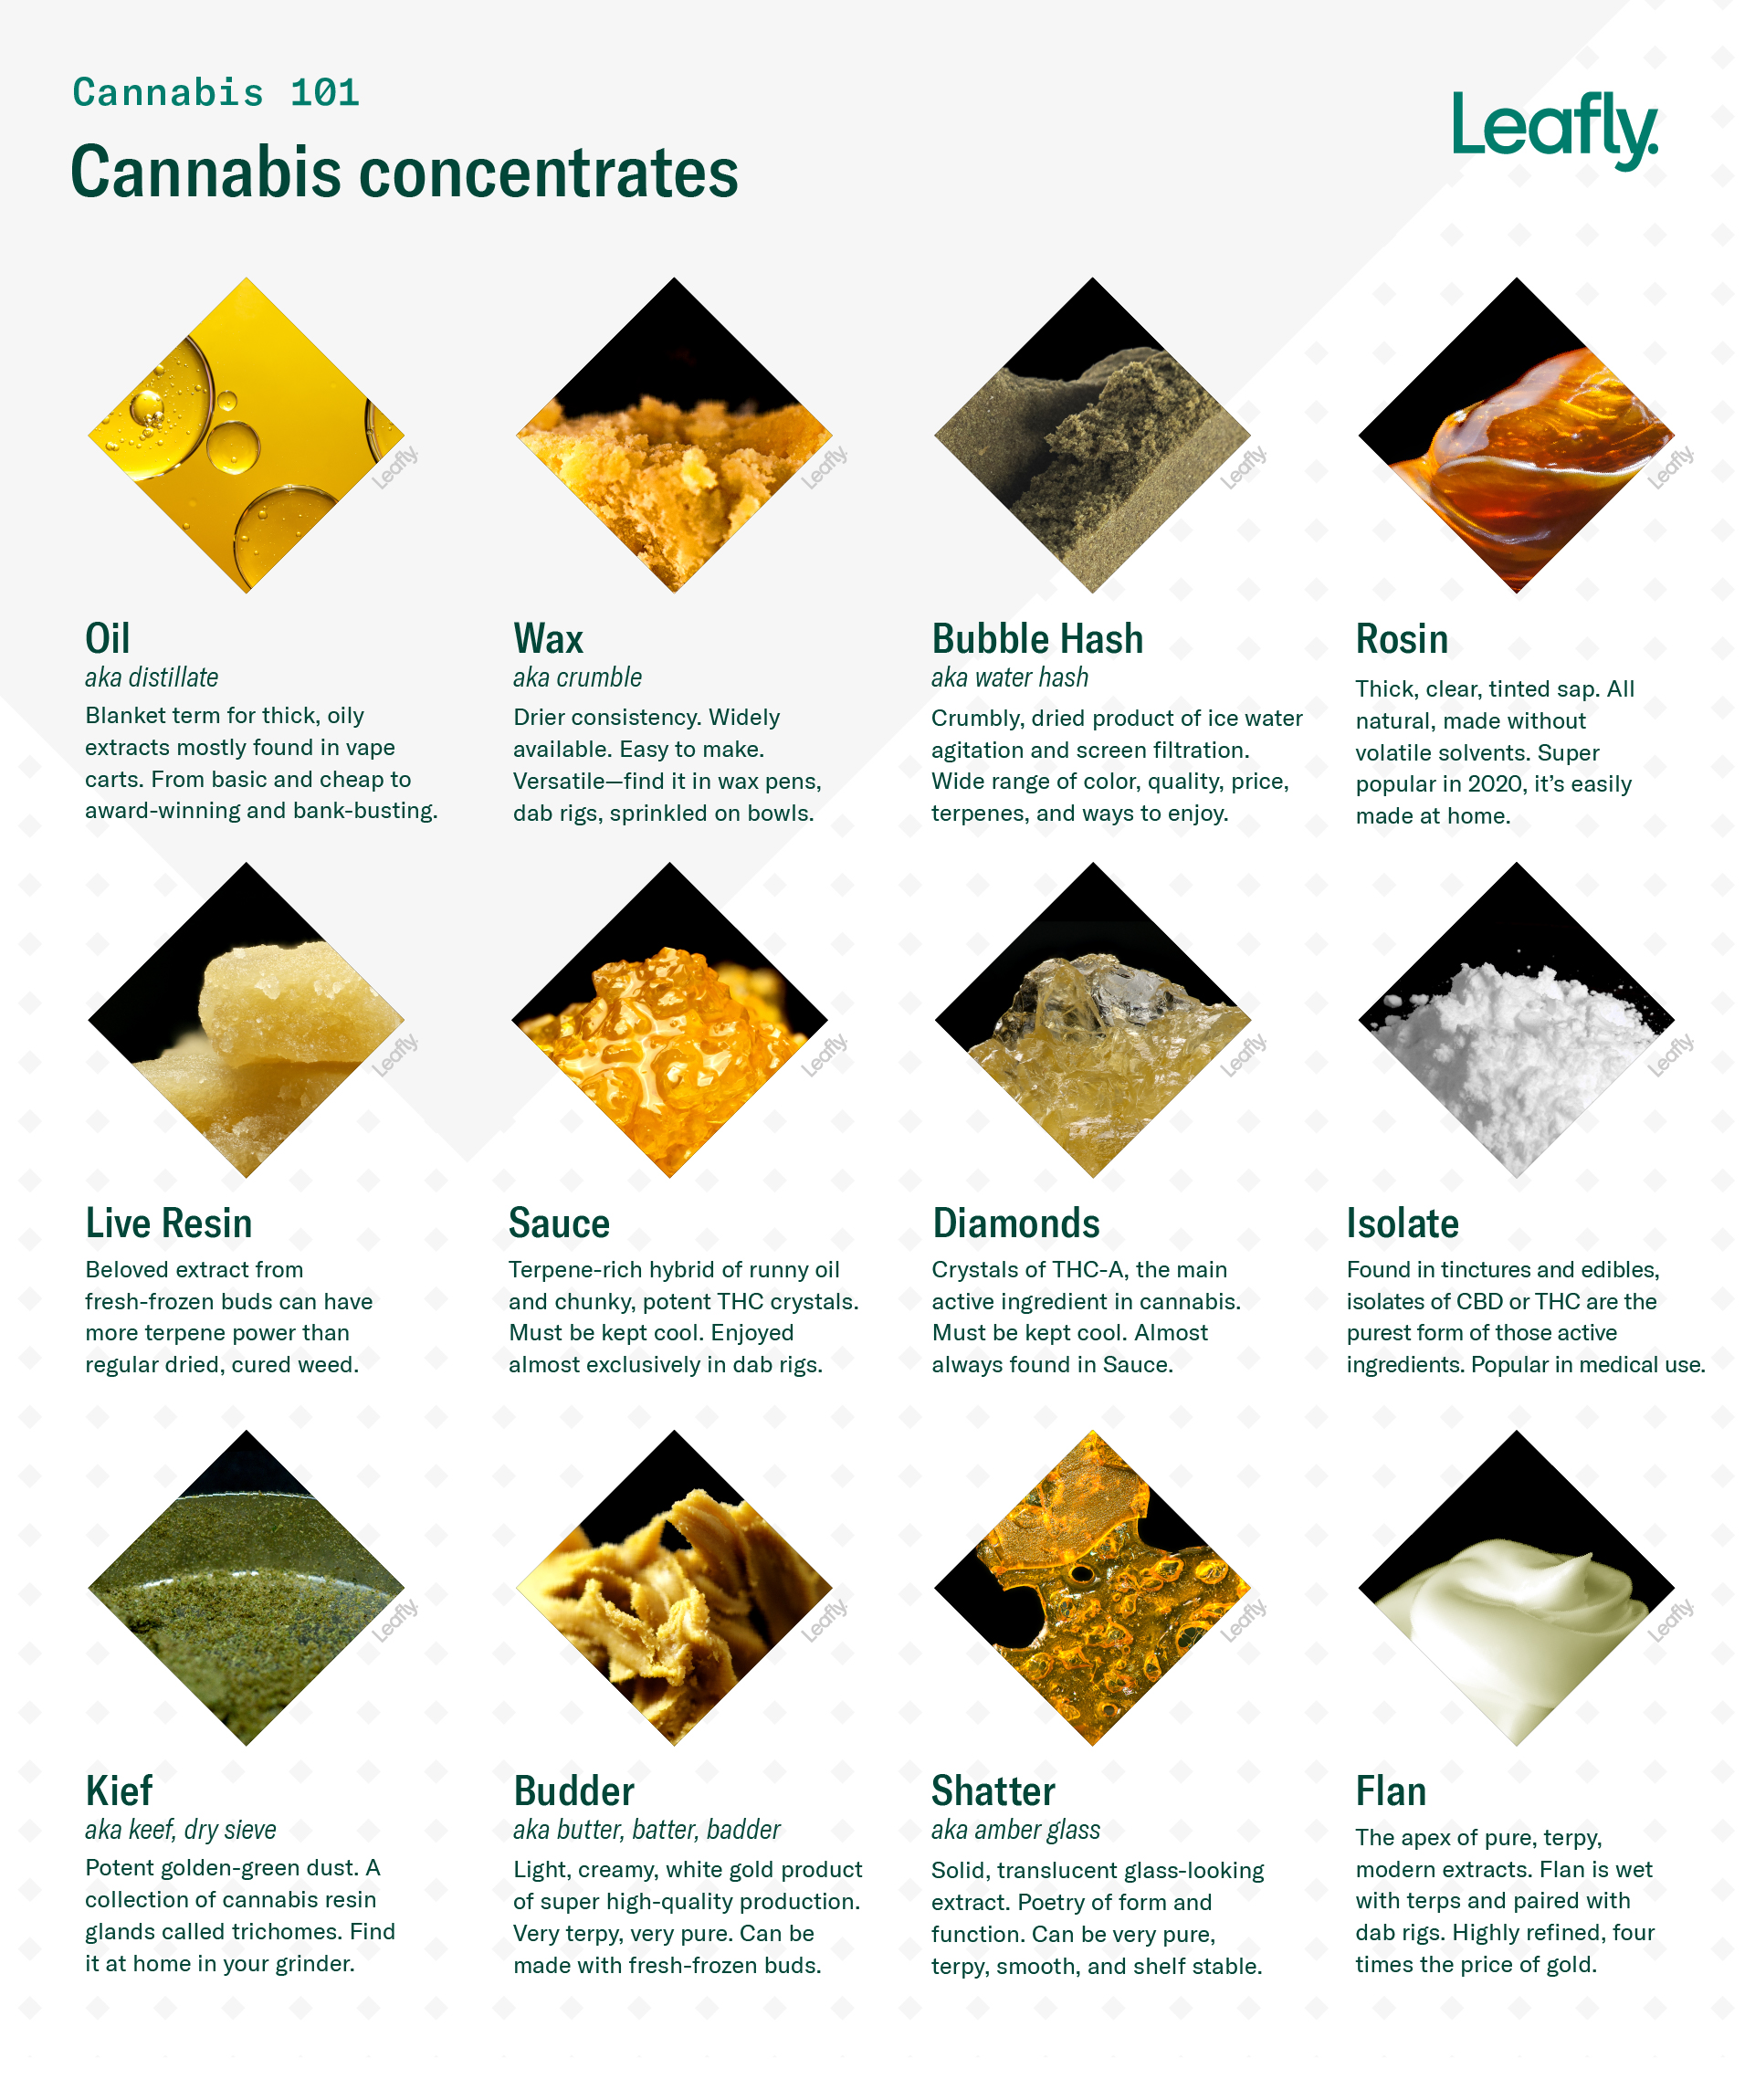 Learn about different types of cannabis concentrates, from oil to wax to bubble hash and more